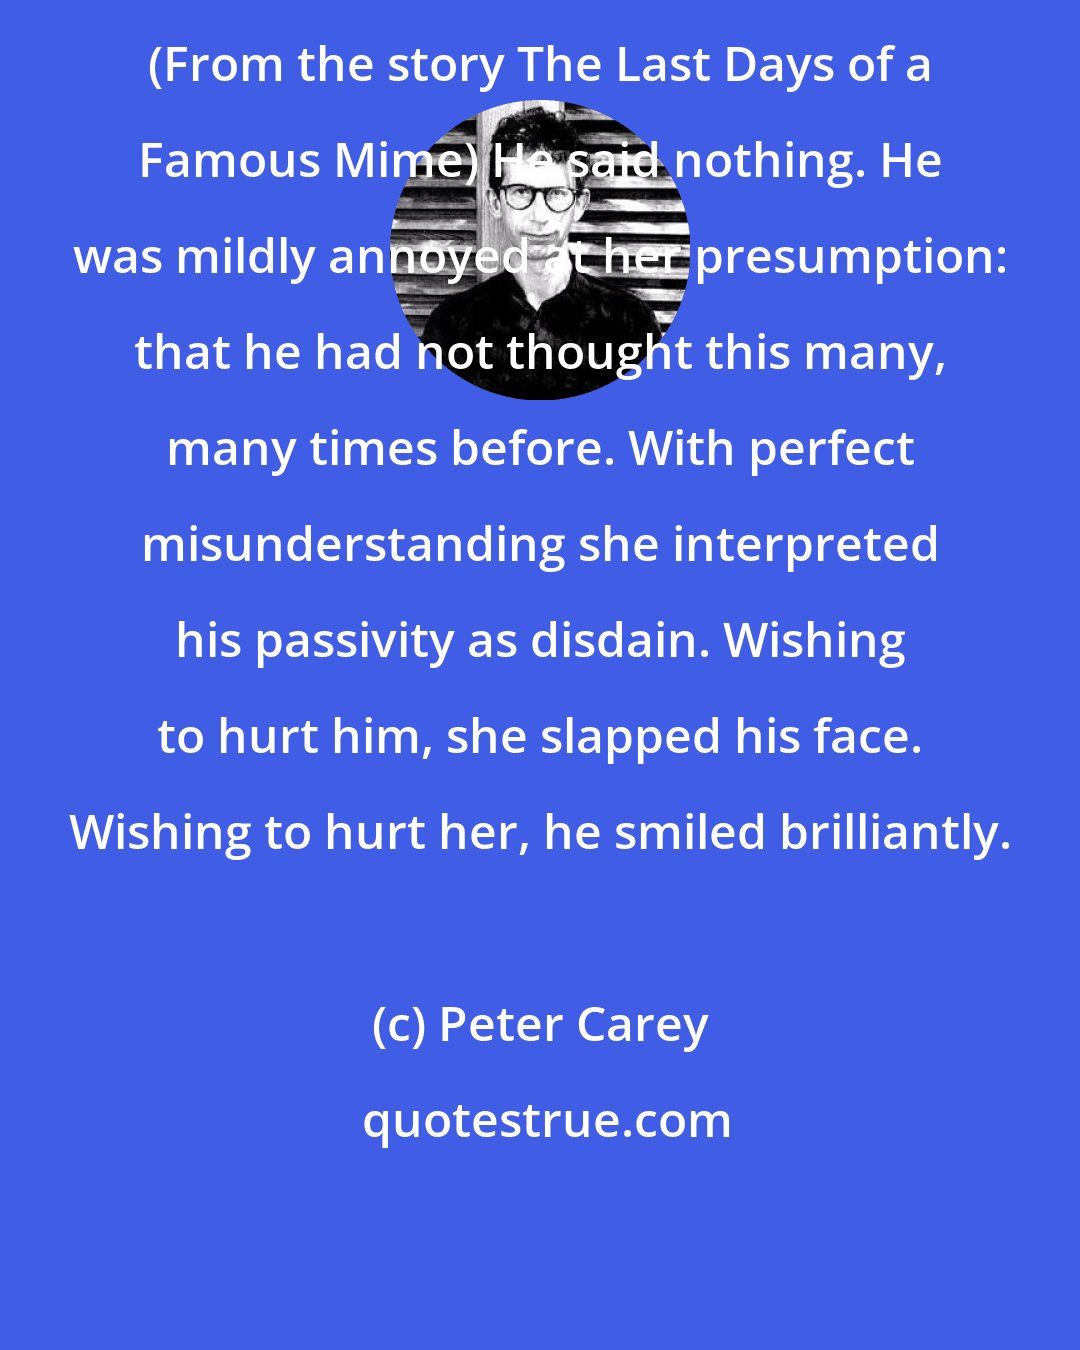 Peter Carey: (From the story The Last Days of a Famous Mime) He said nothing. He was mildly annoyed at her presumption: that he had not thought this many, many times before. With perfect misunderstanding she interpreted his passivity as disdain. Wishing to hurt him, she slapped his face. Wishing to hurt her, he smiled brilliantly.